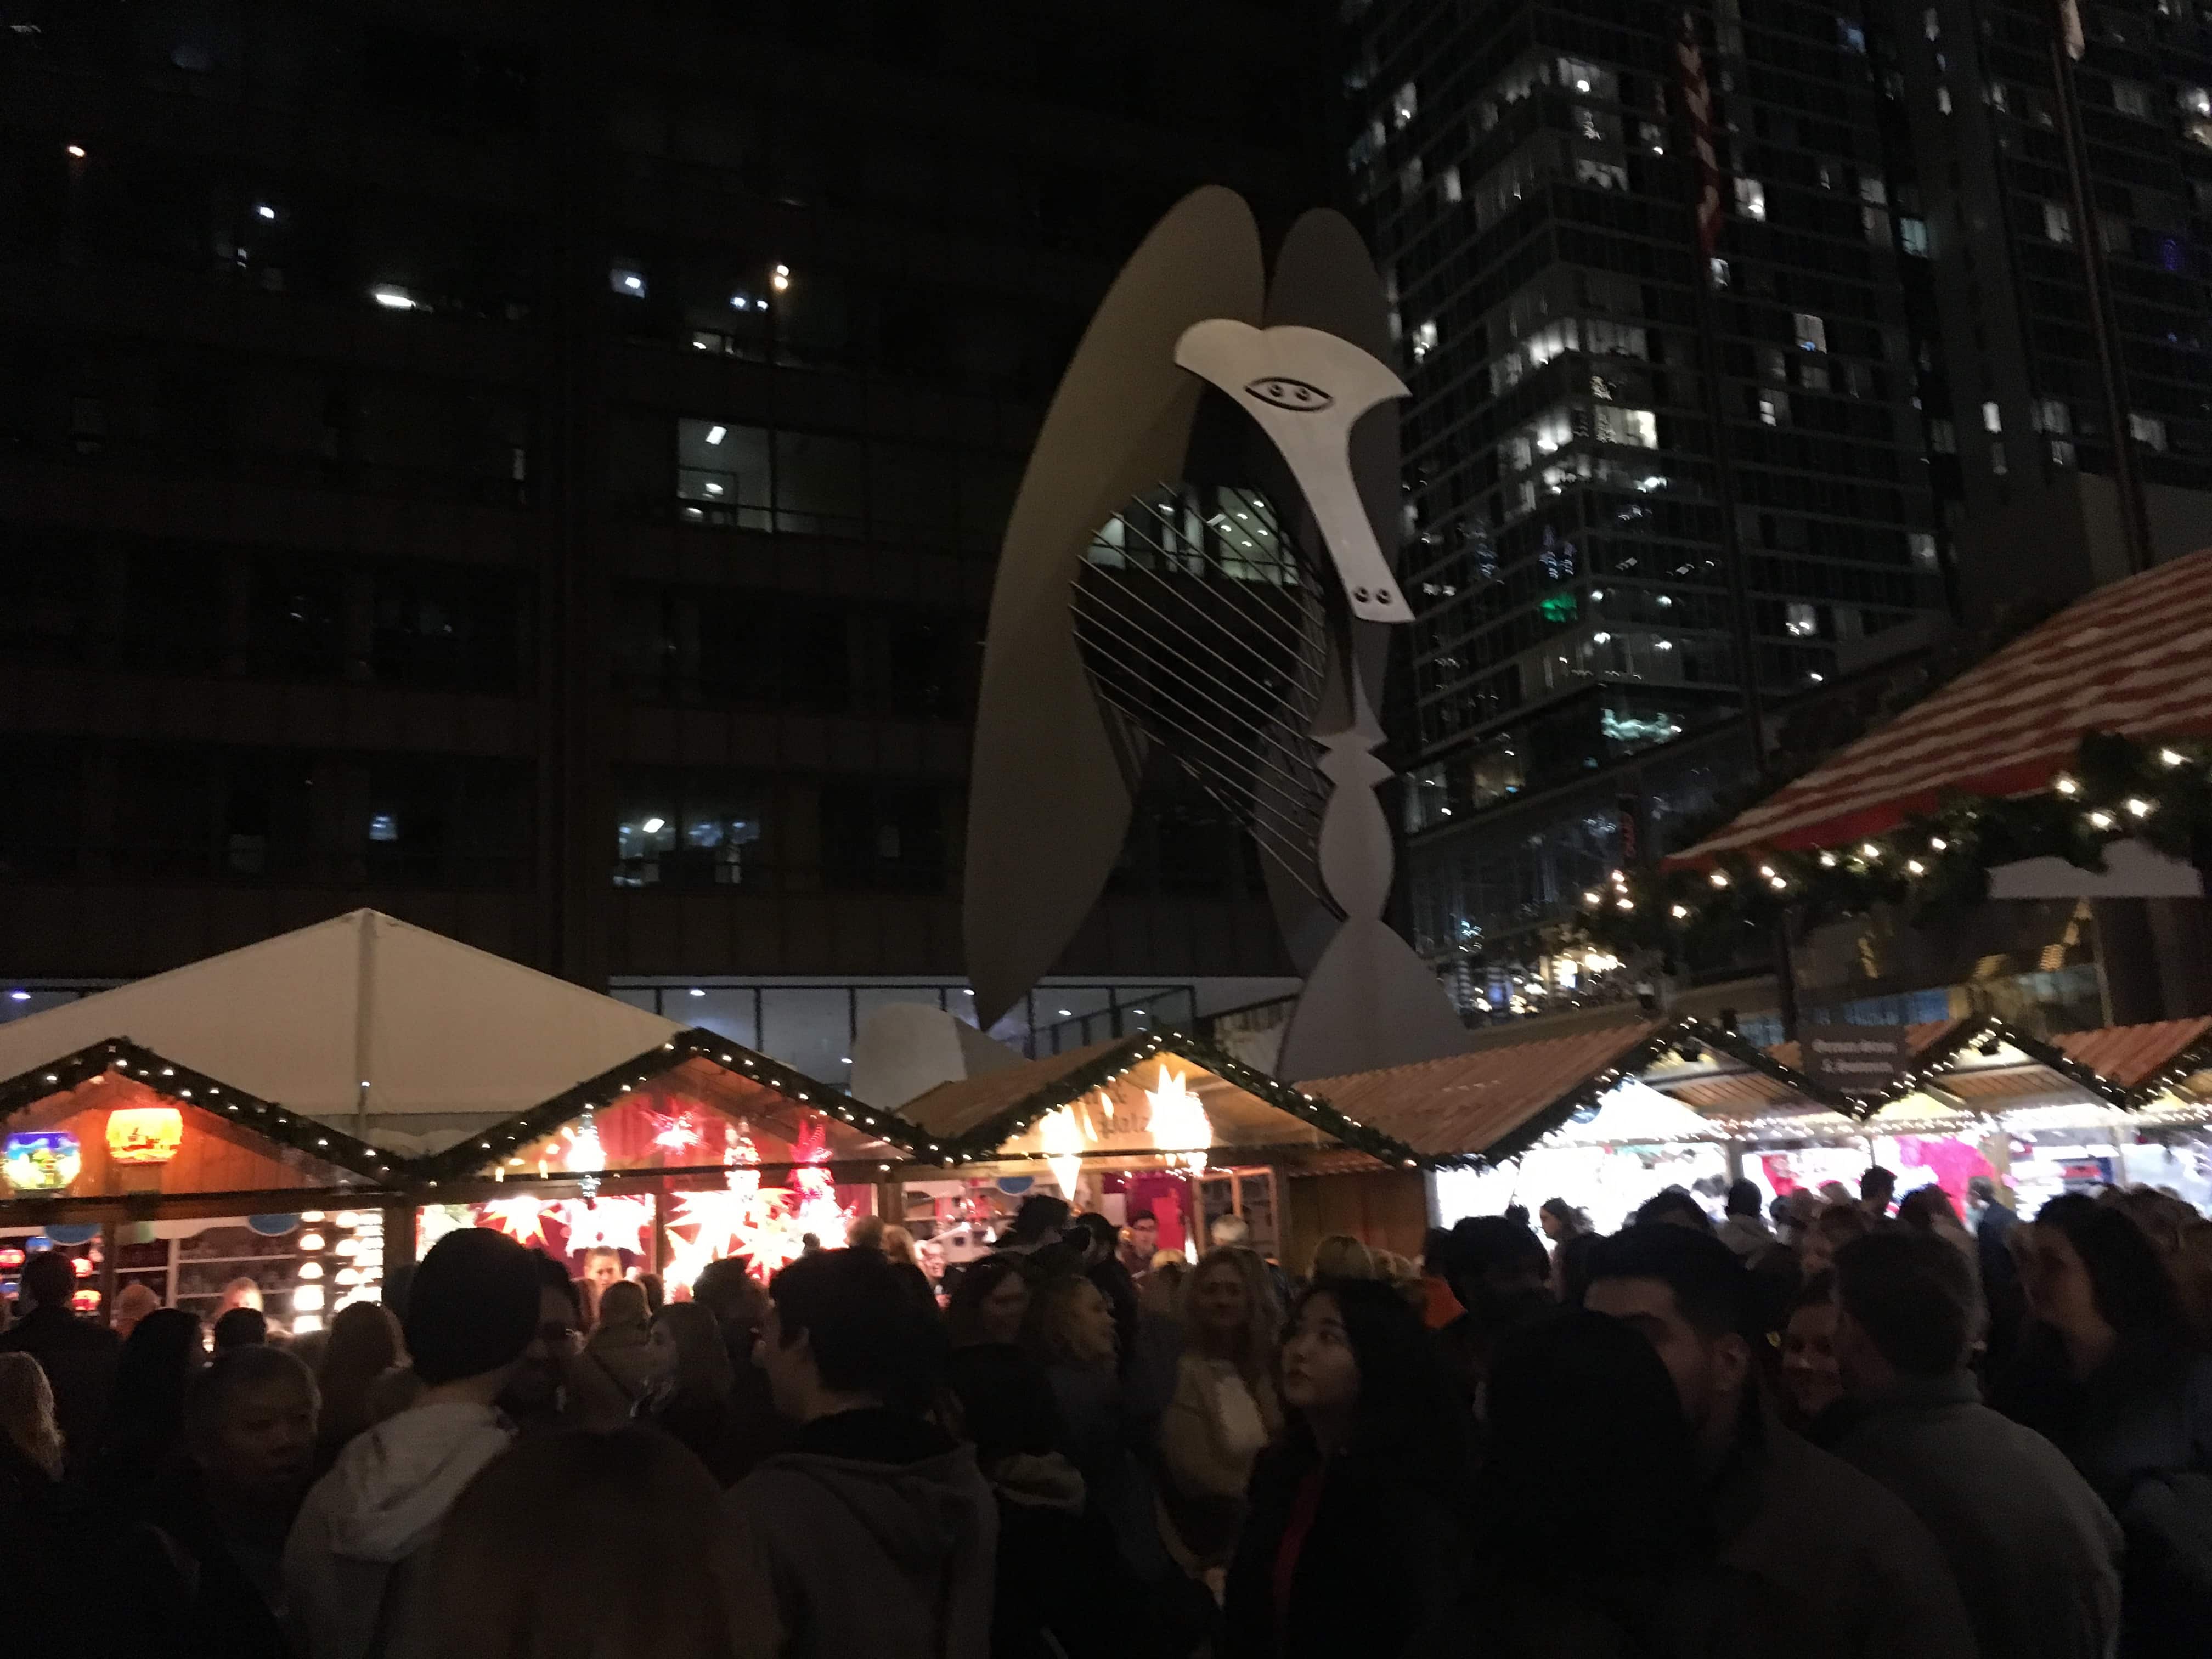 The Picasso watching over Christkindlmarket at Daley Plaza in Chicago, Illinois